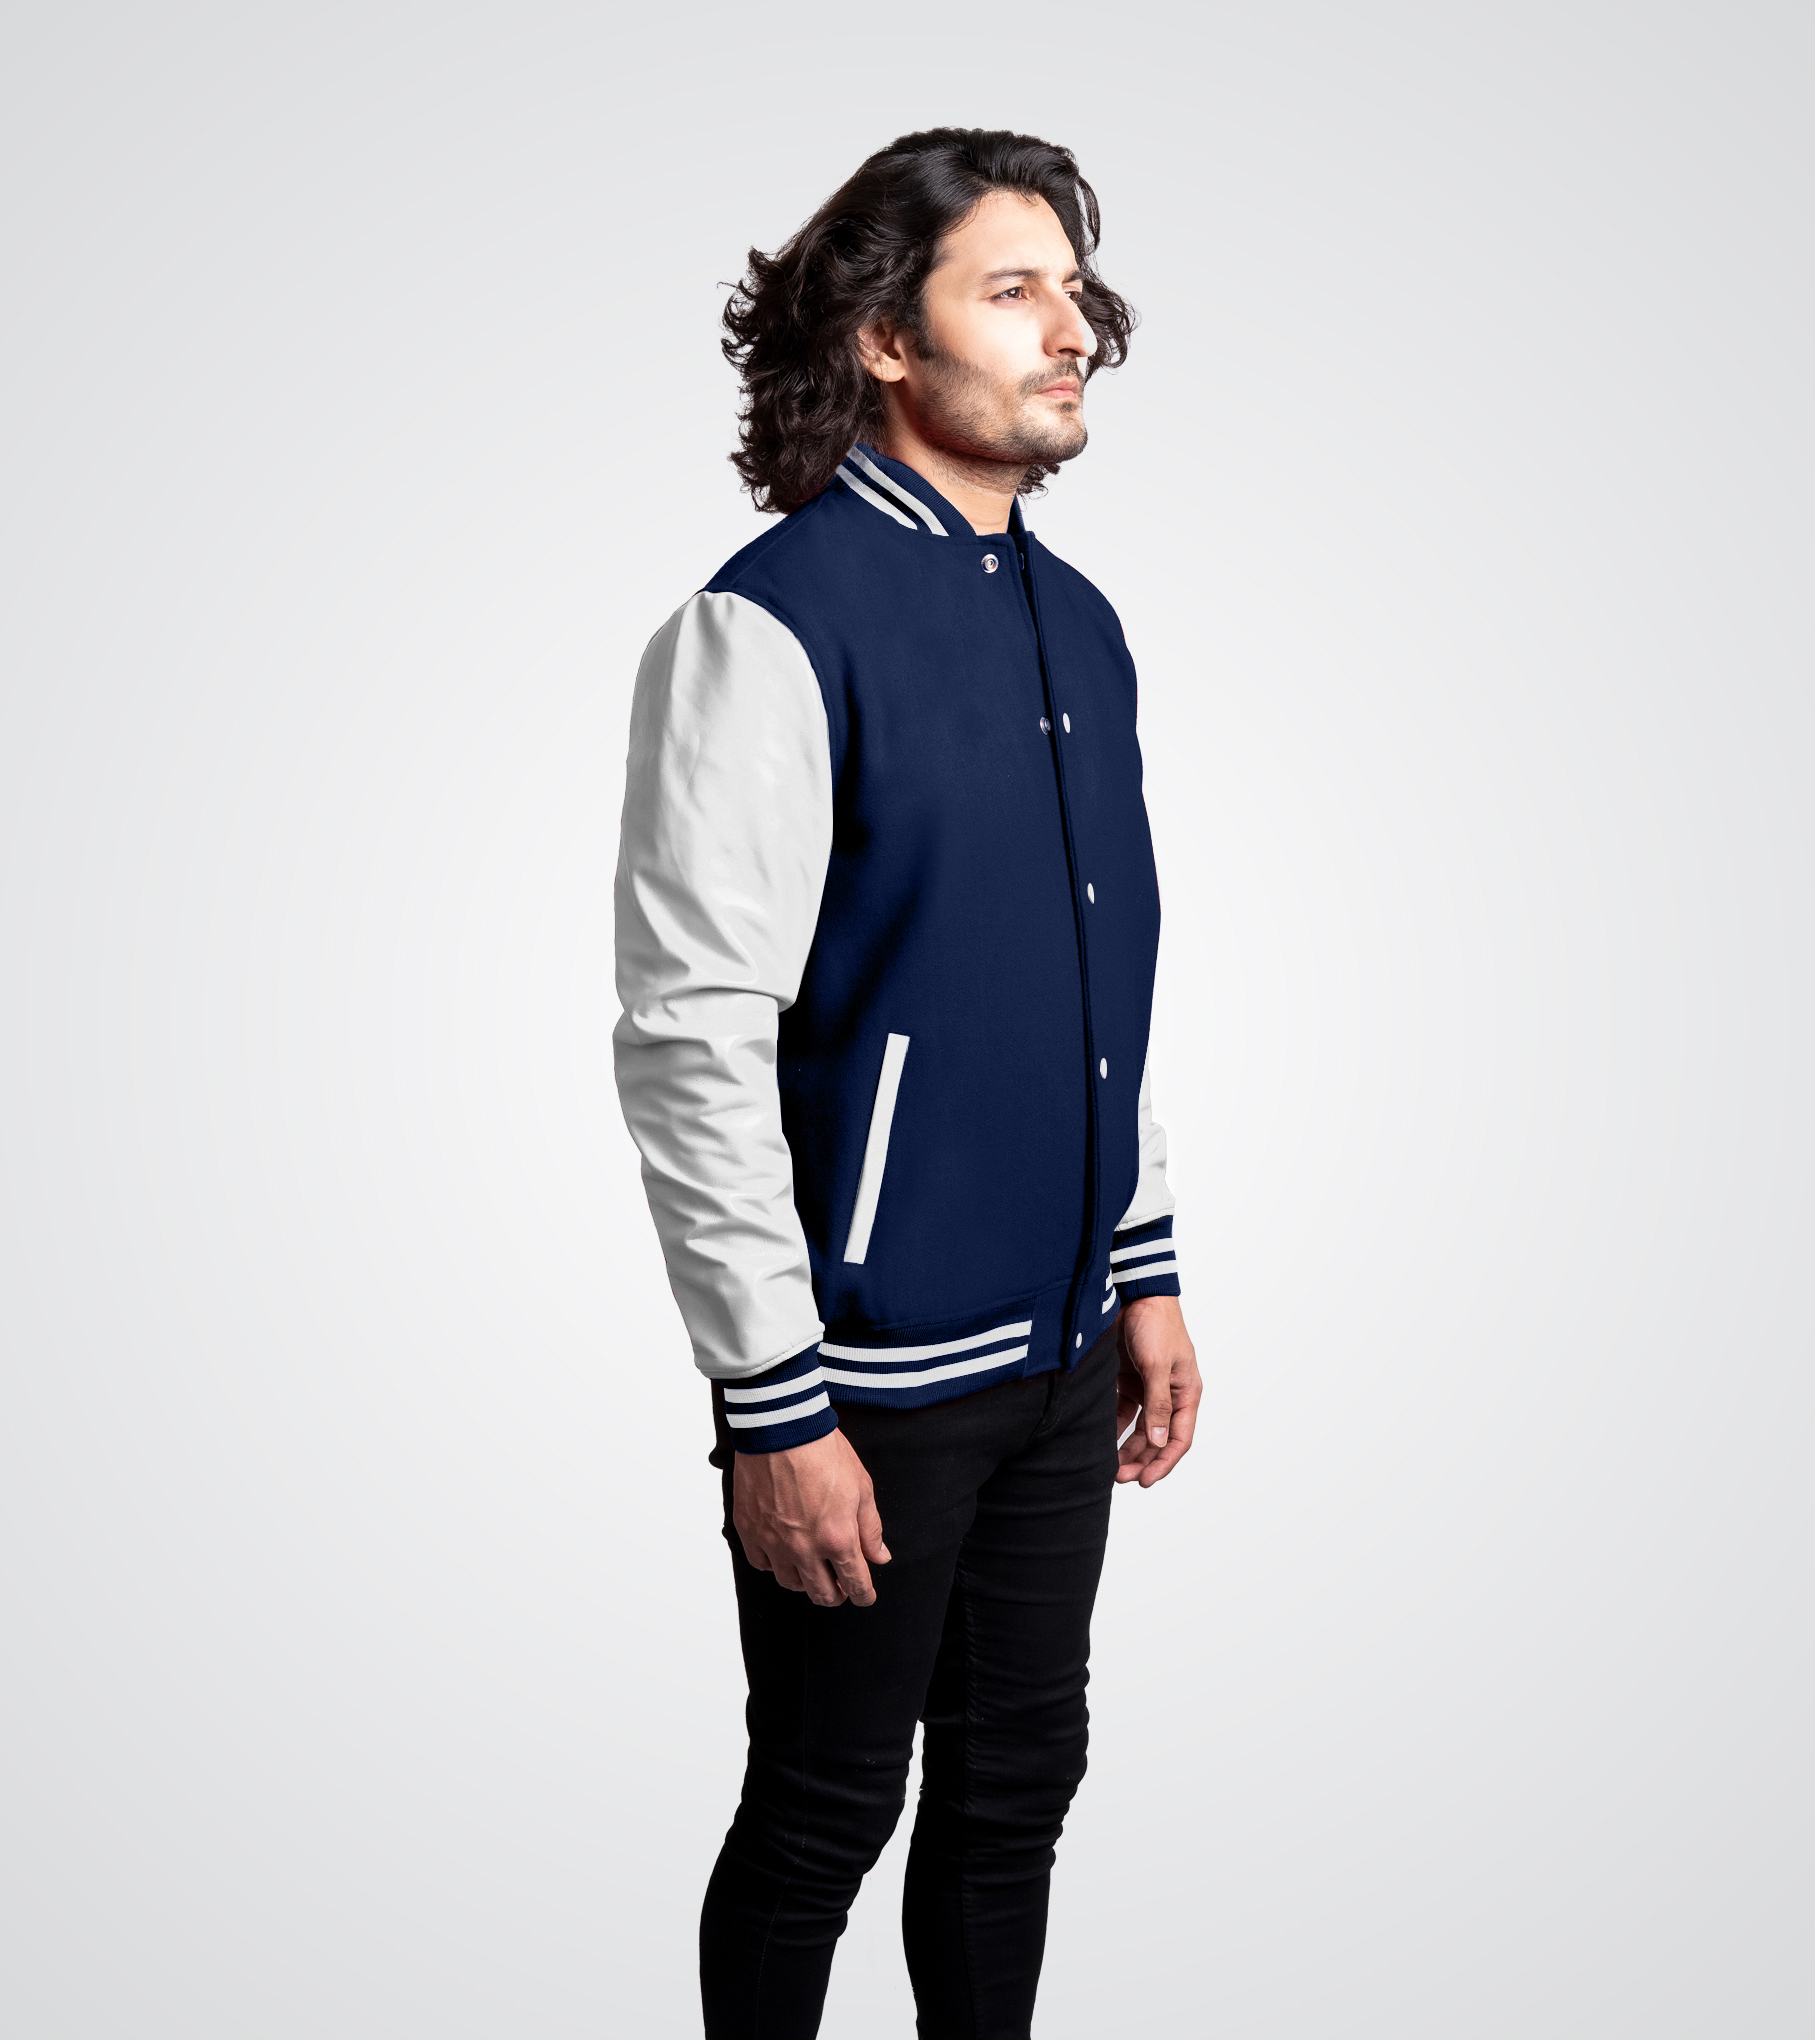 Navy blue wool body and White leather sleeves Letterman Jacket